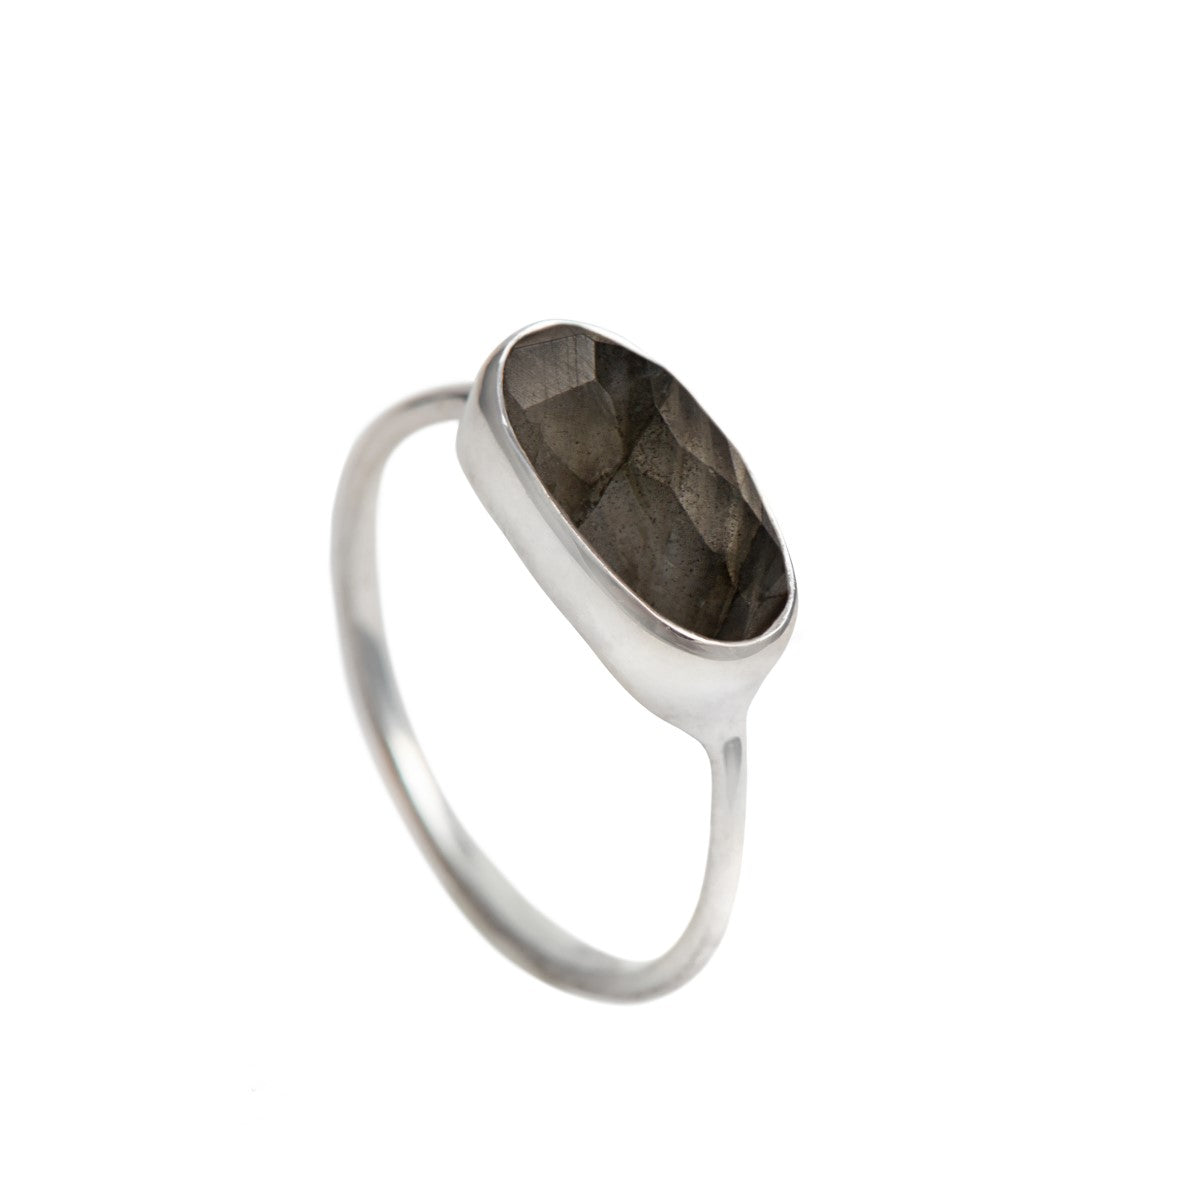 Faceted Oval Cut Natural Gemstone Sterling Silver Fine Band Ring - Labradorite